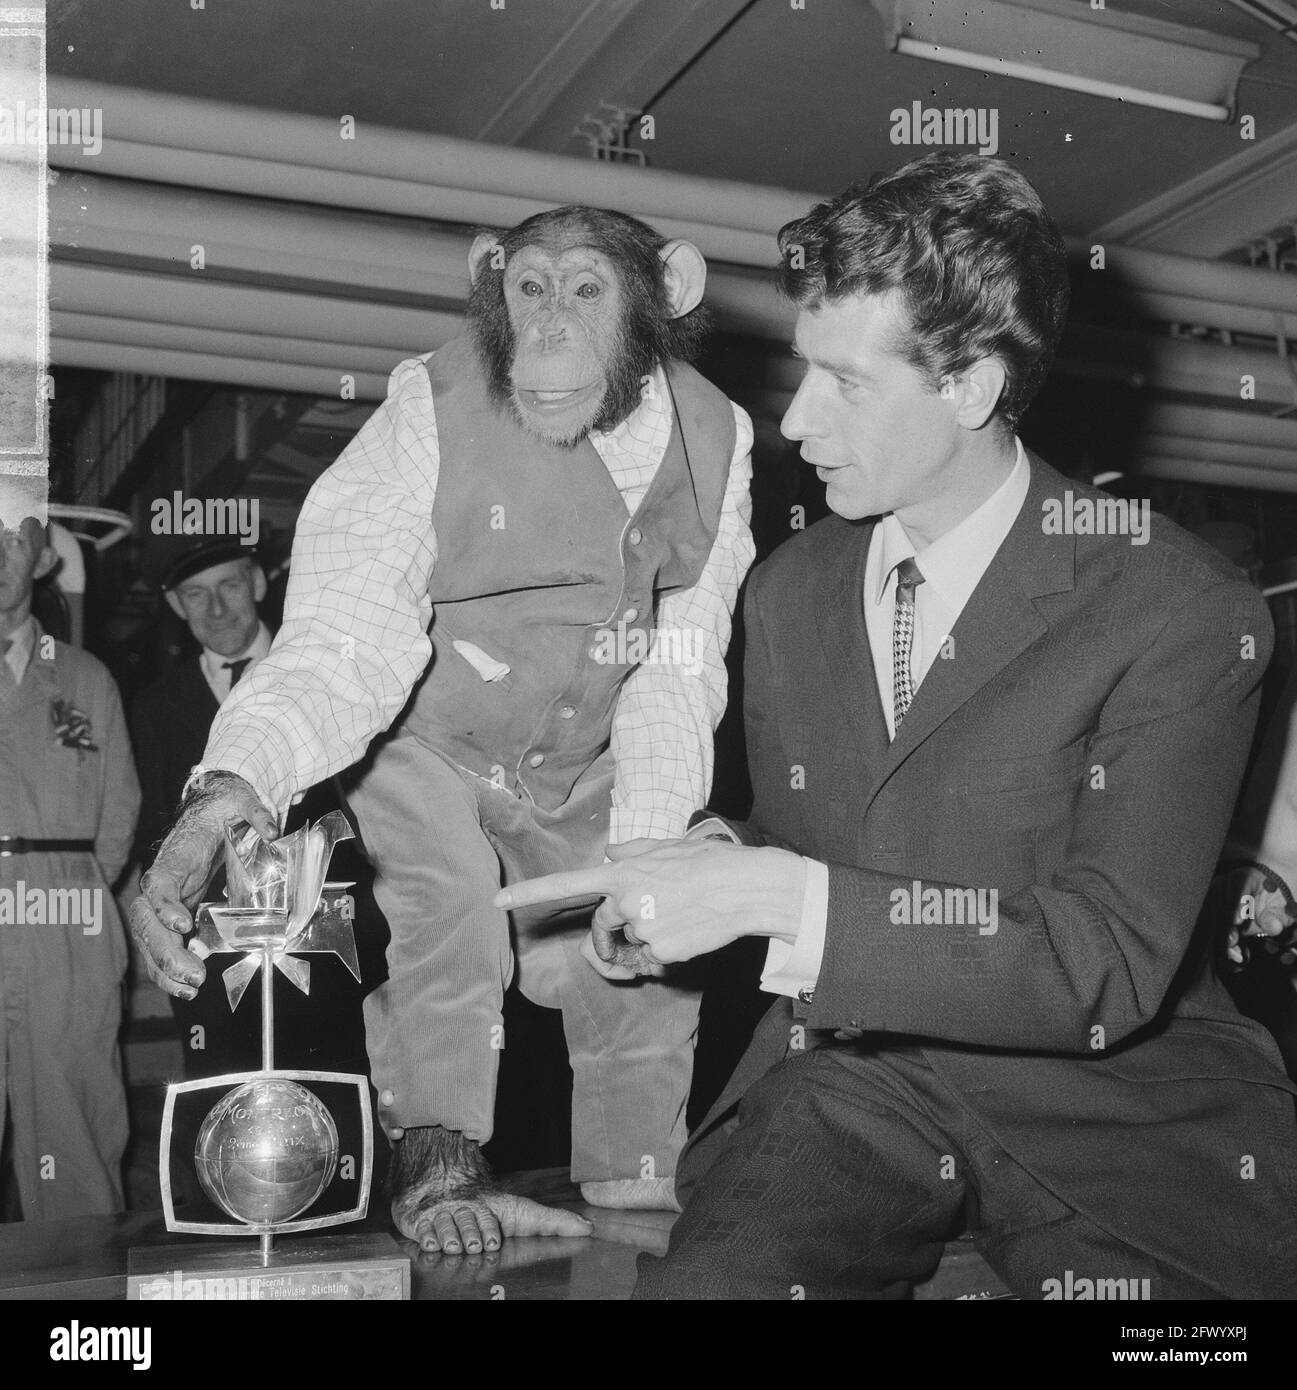 Rudi Carrell has won the silver rose. Rudi Carrell with chimpanzee Plato playing in his show, April 25, 1964, arrivals, chimpanzees, The Netherlands, 20th century press agency photo, news to remember, documentary, historic photography 1945-1990, visual stories, human history of the Twentieth Century, capturing moments in time Stock Photo